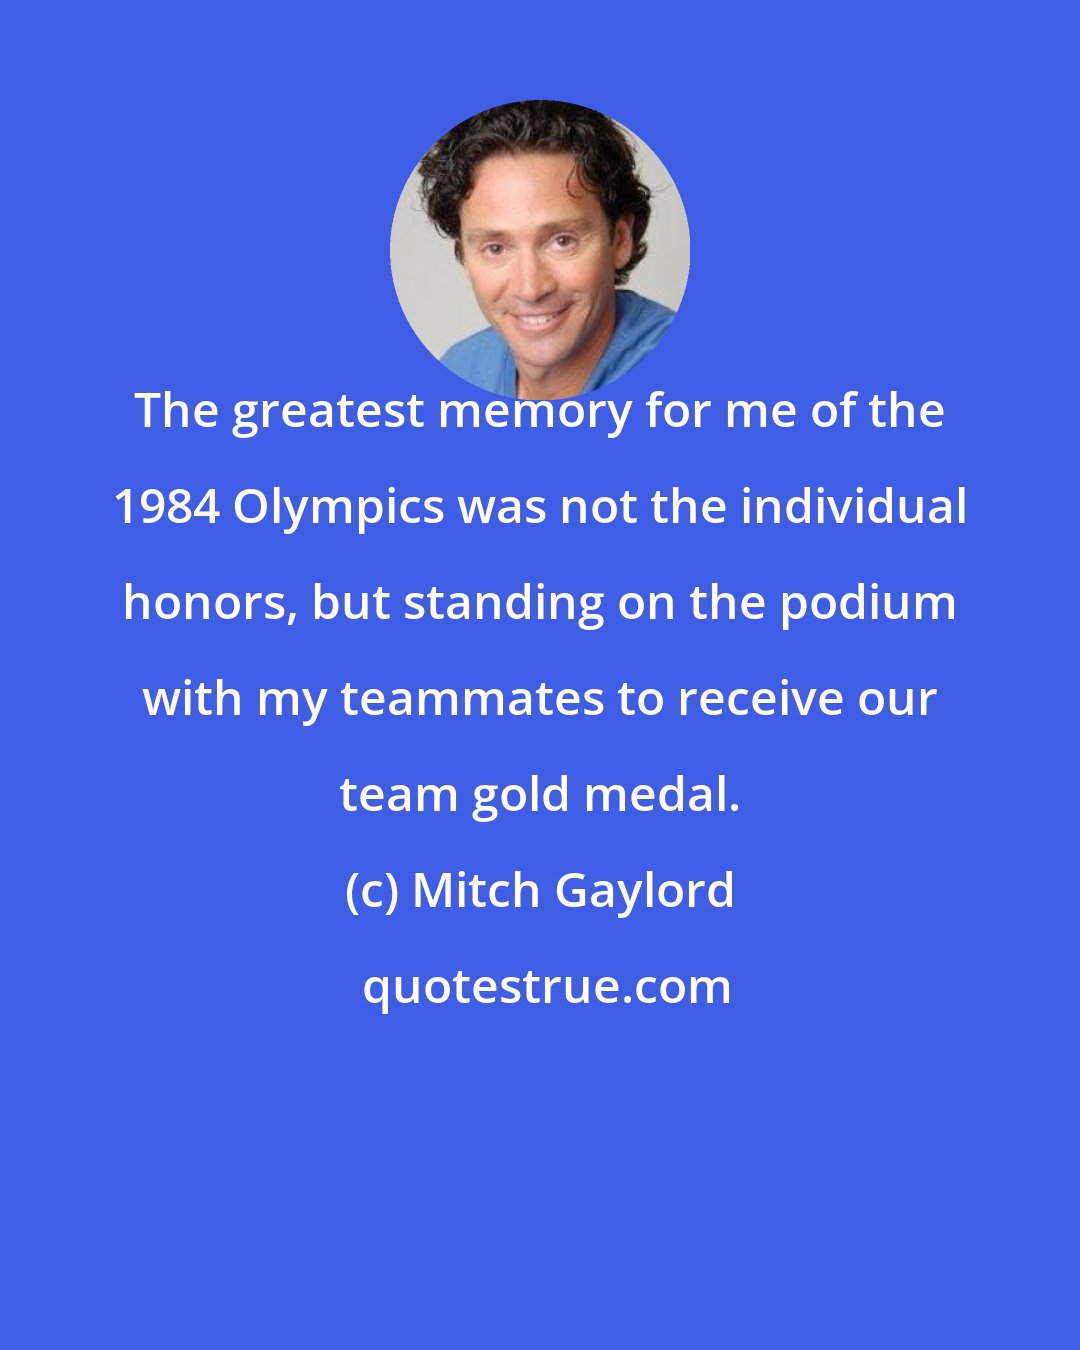 Mitch Gaylord: The greatest memory for me of the 1984 Olympics was not the individual honors, but standing on the podium with my teammates to receive our team gold medal.